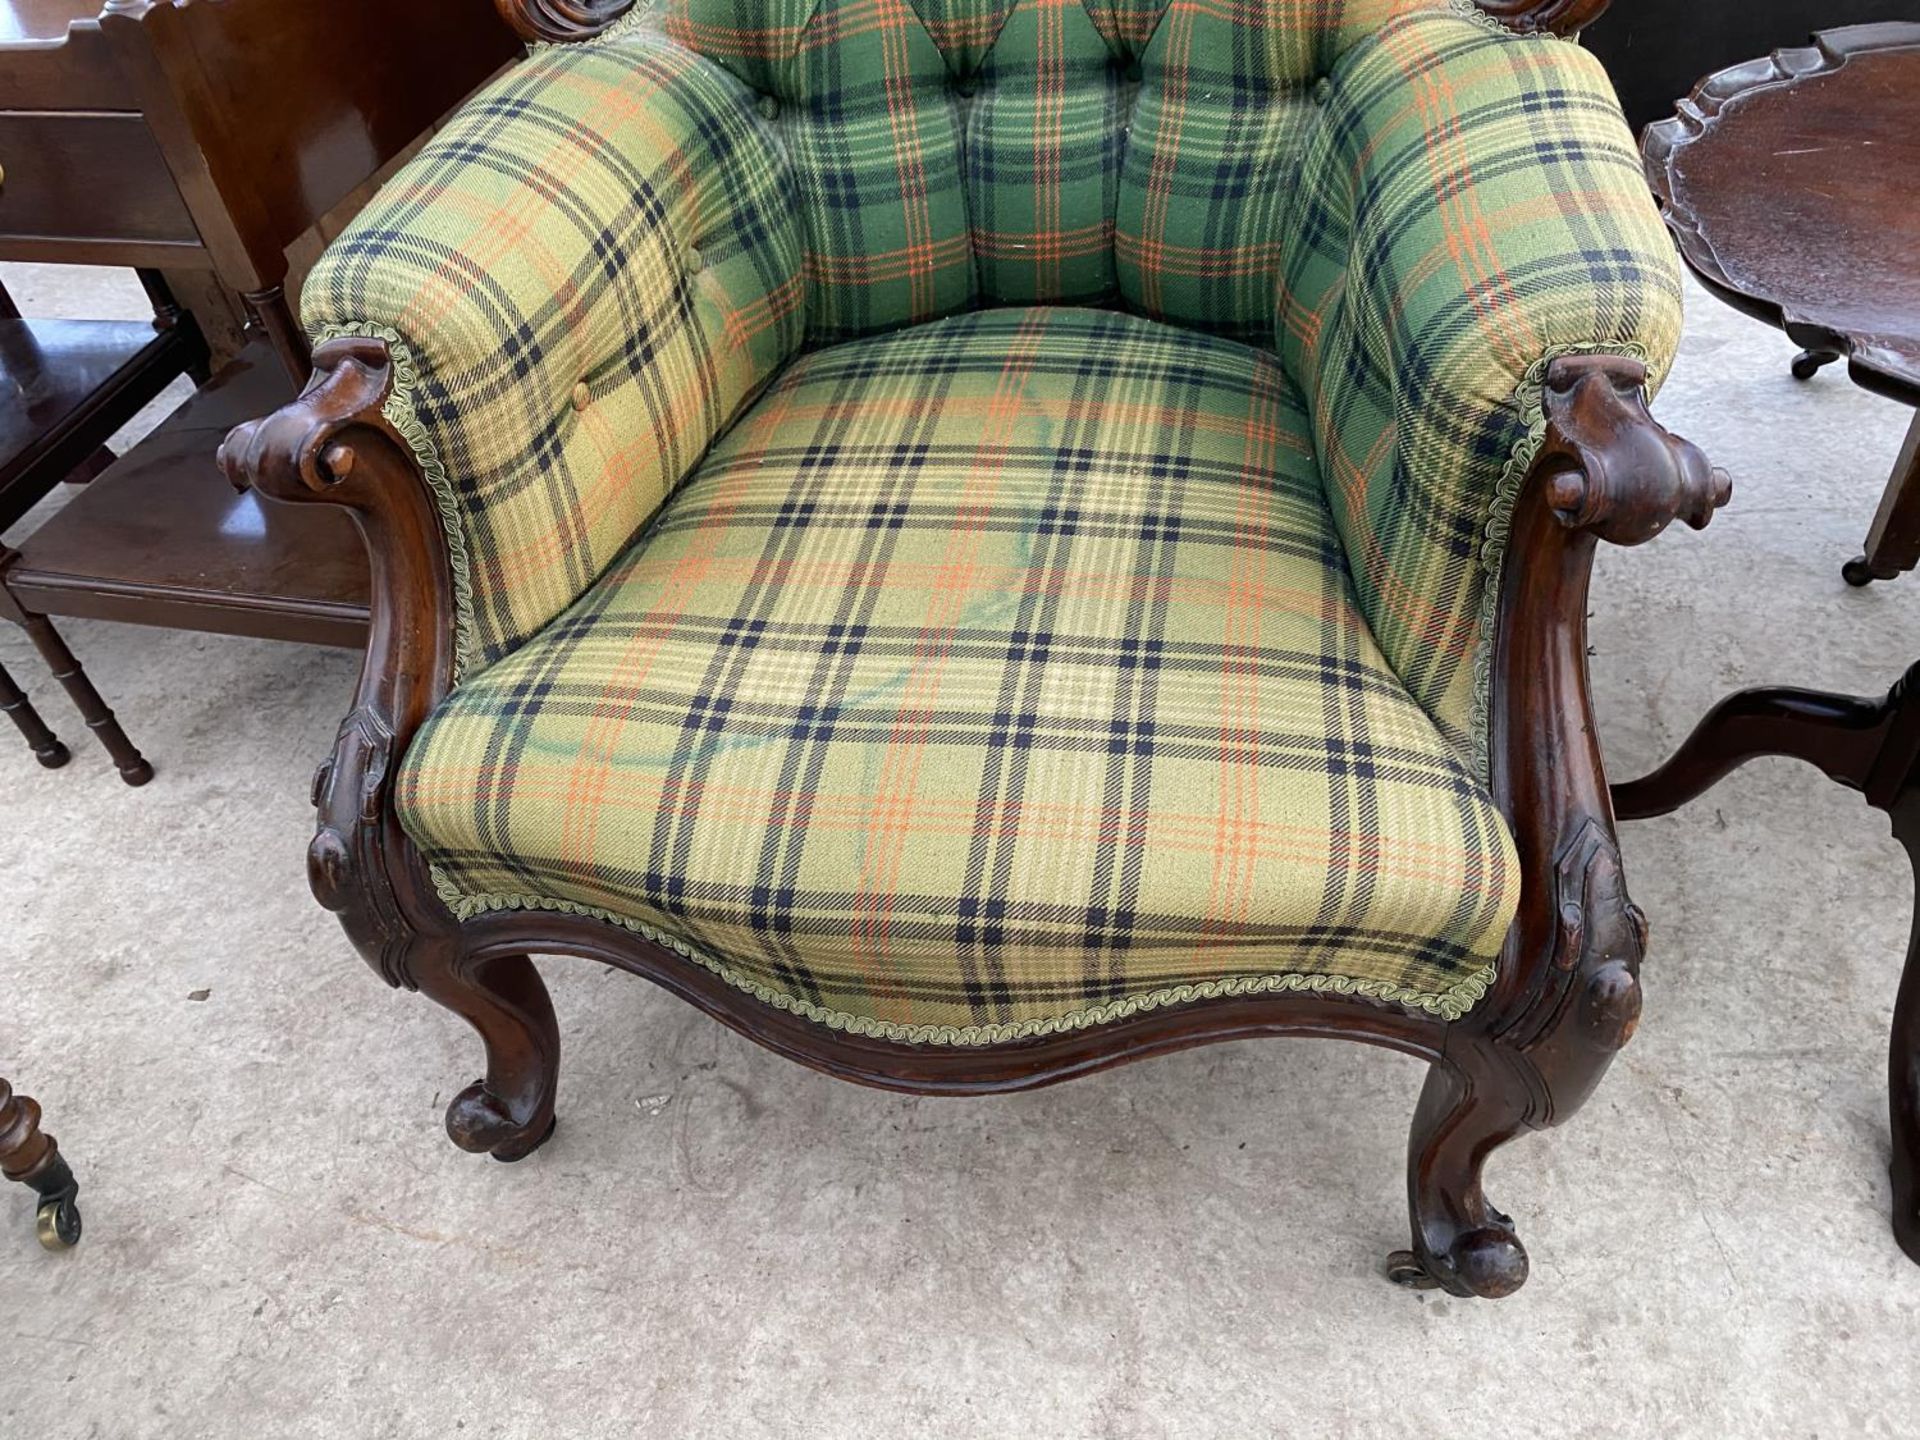 A VICTORIAN MAHOGANY SPOON-BACK CHAIR WITH BUTTON-BACK, ON FRONT CABRIOLE LEGS - Image 3 of 4